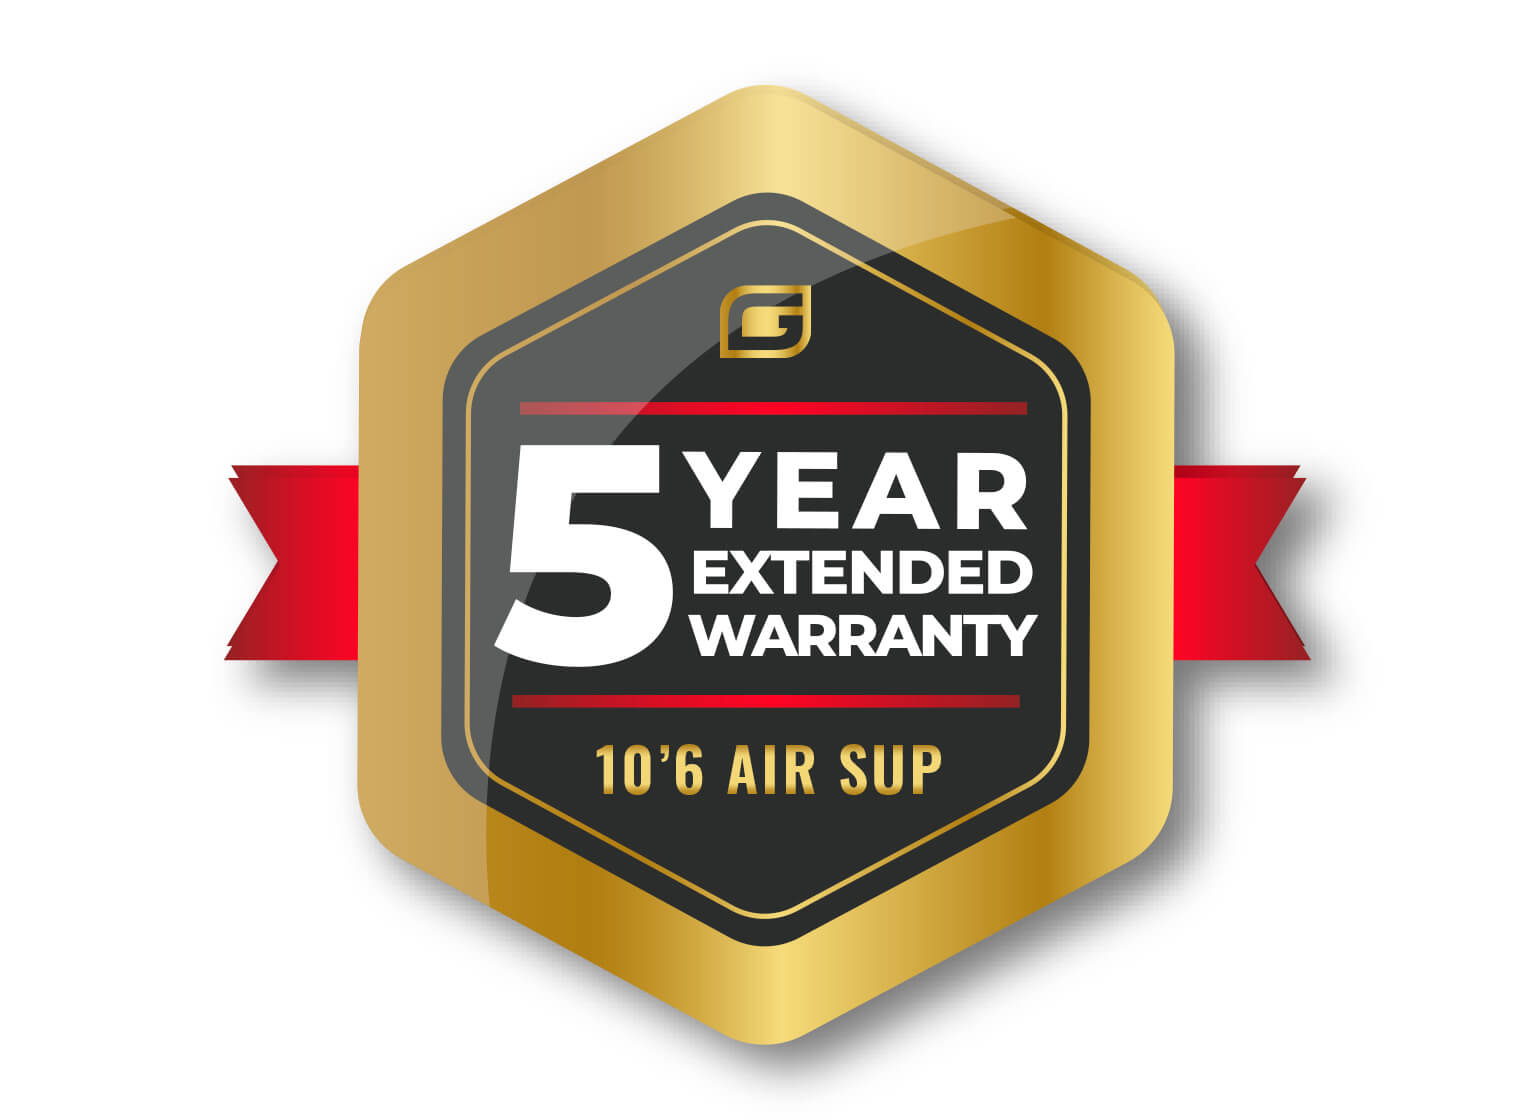 10'6 AIR 5 Year Extended Warranty